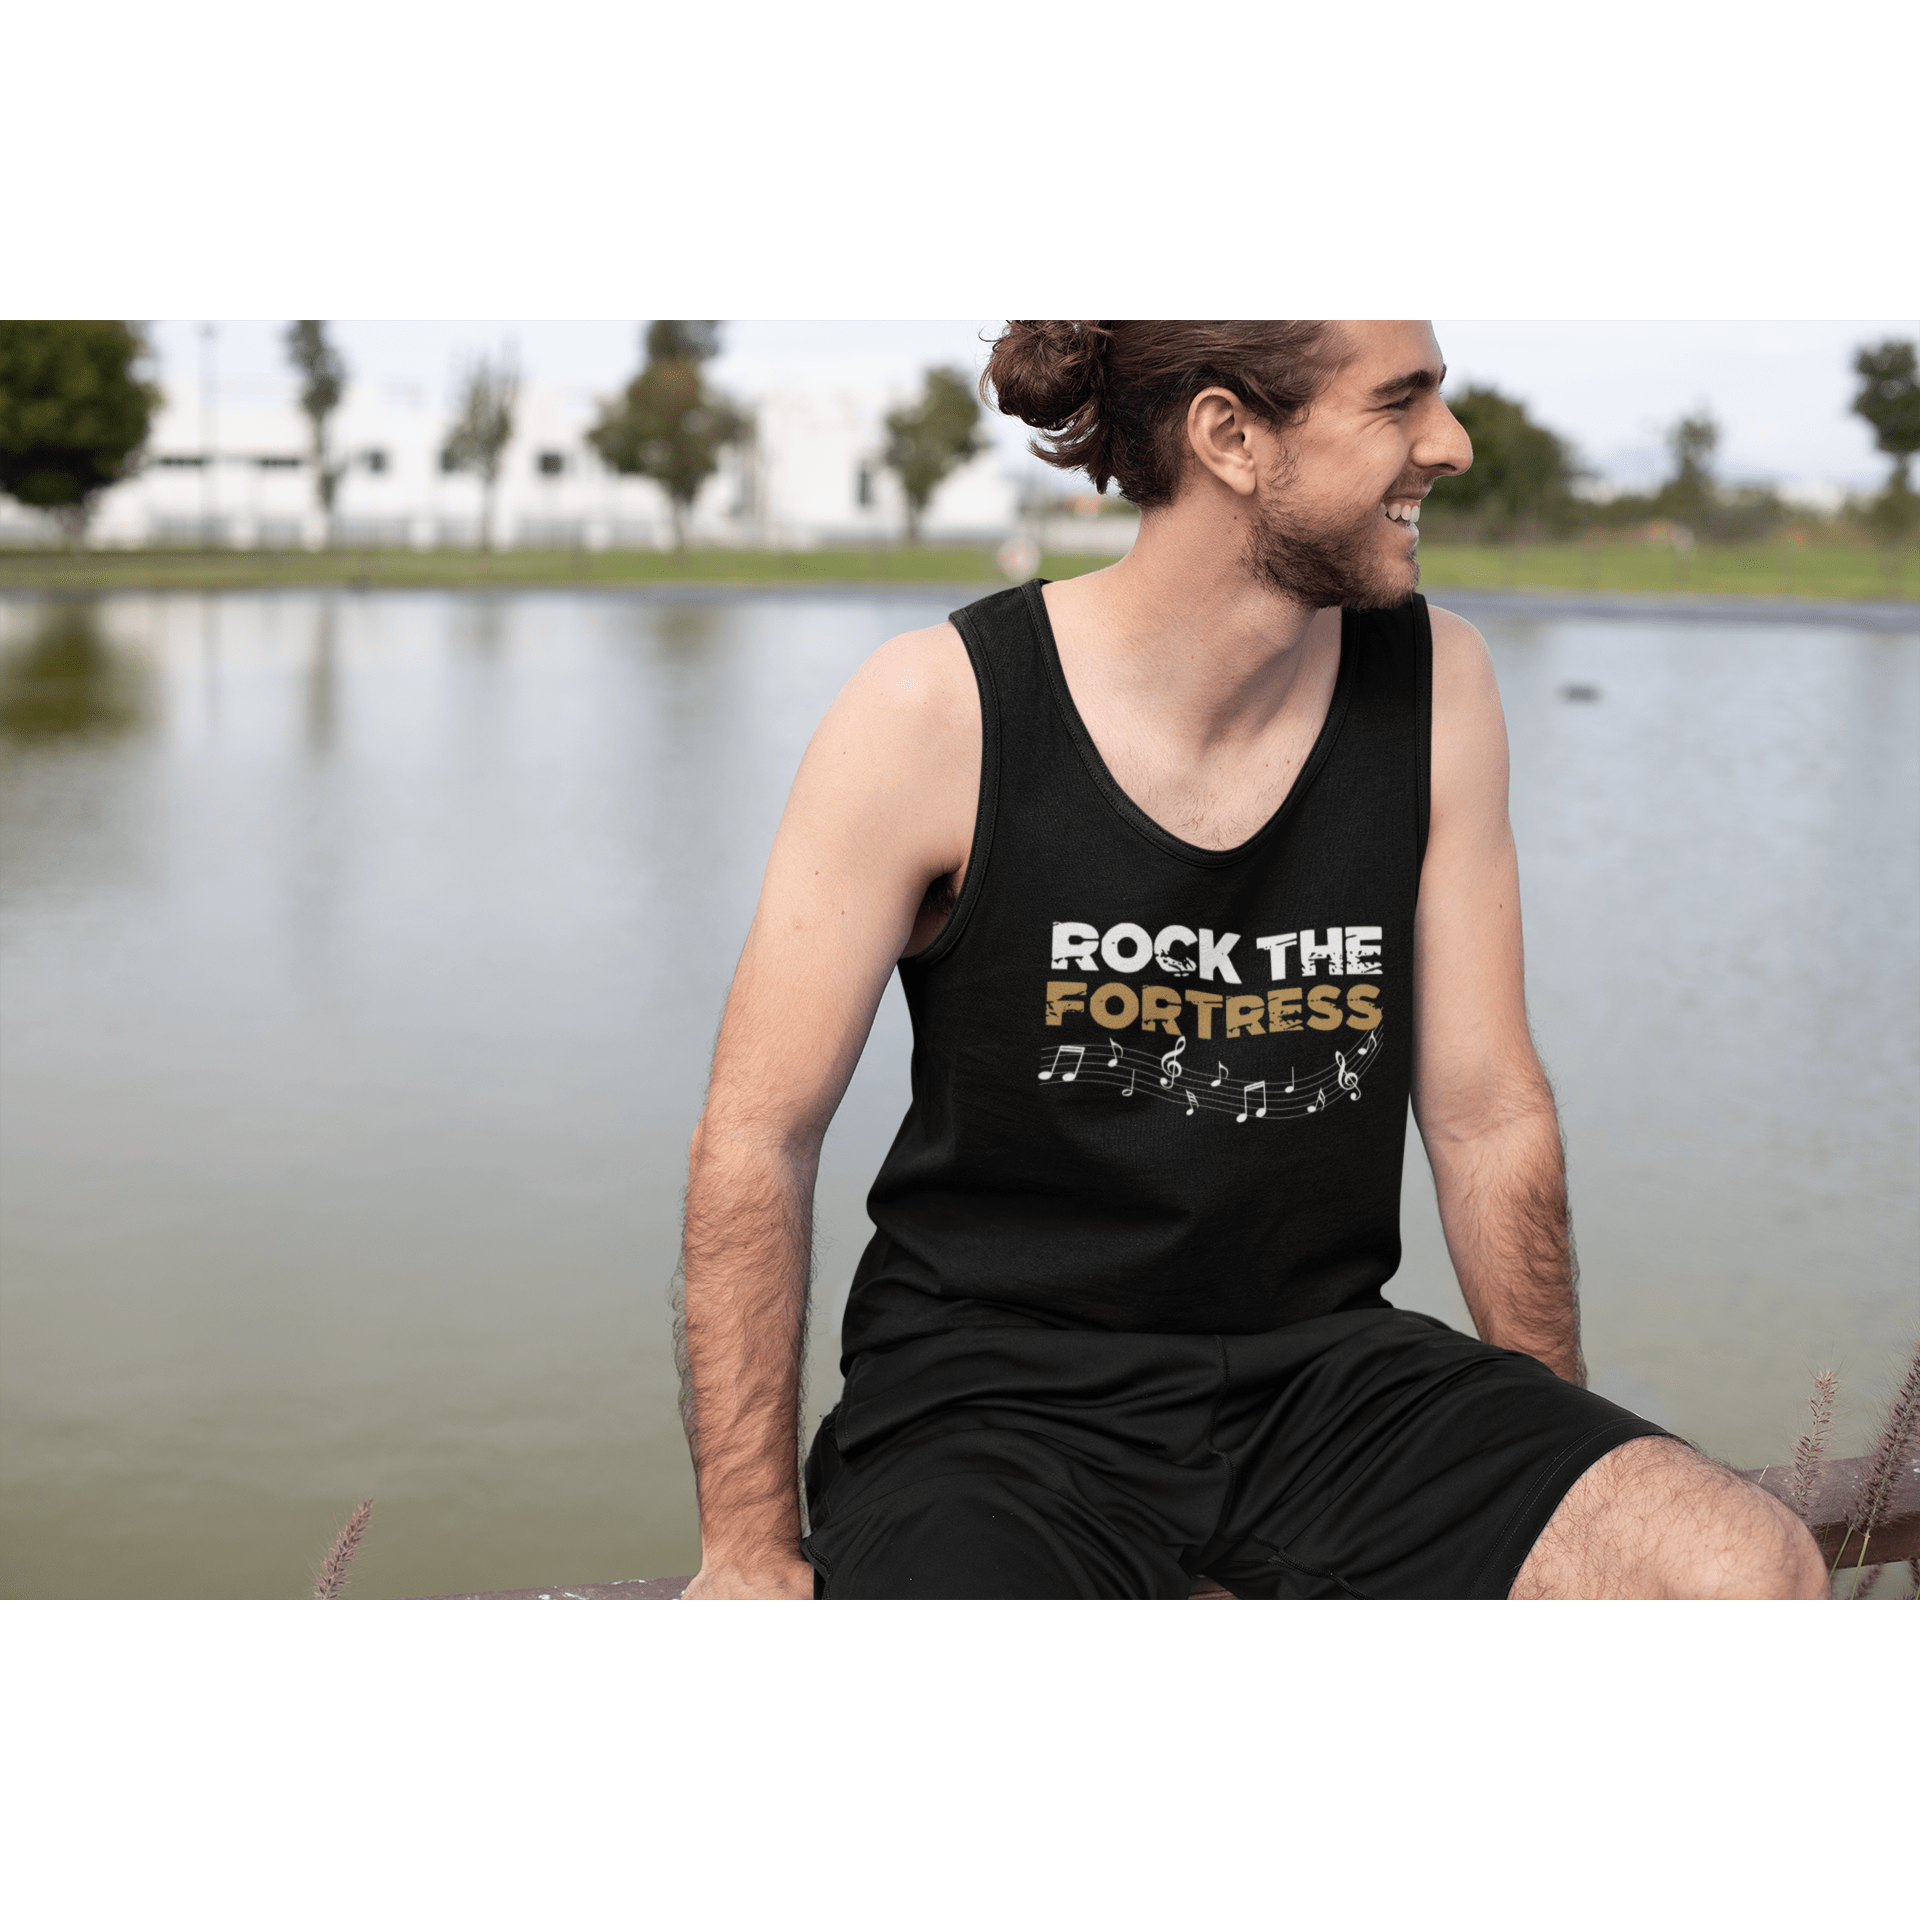 Tank Top "Rock The Fortress" Unisex Jersey Tank Top